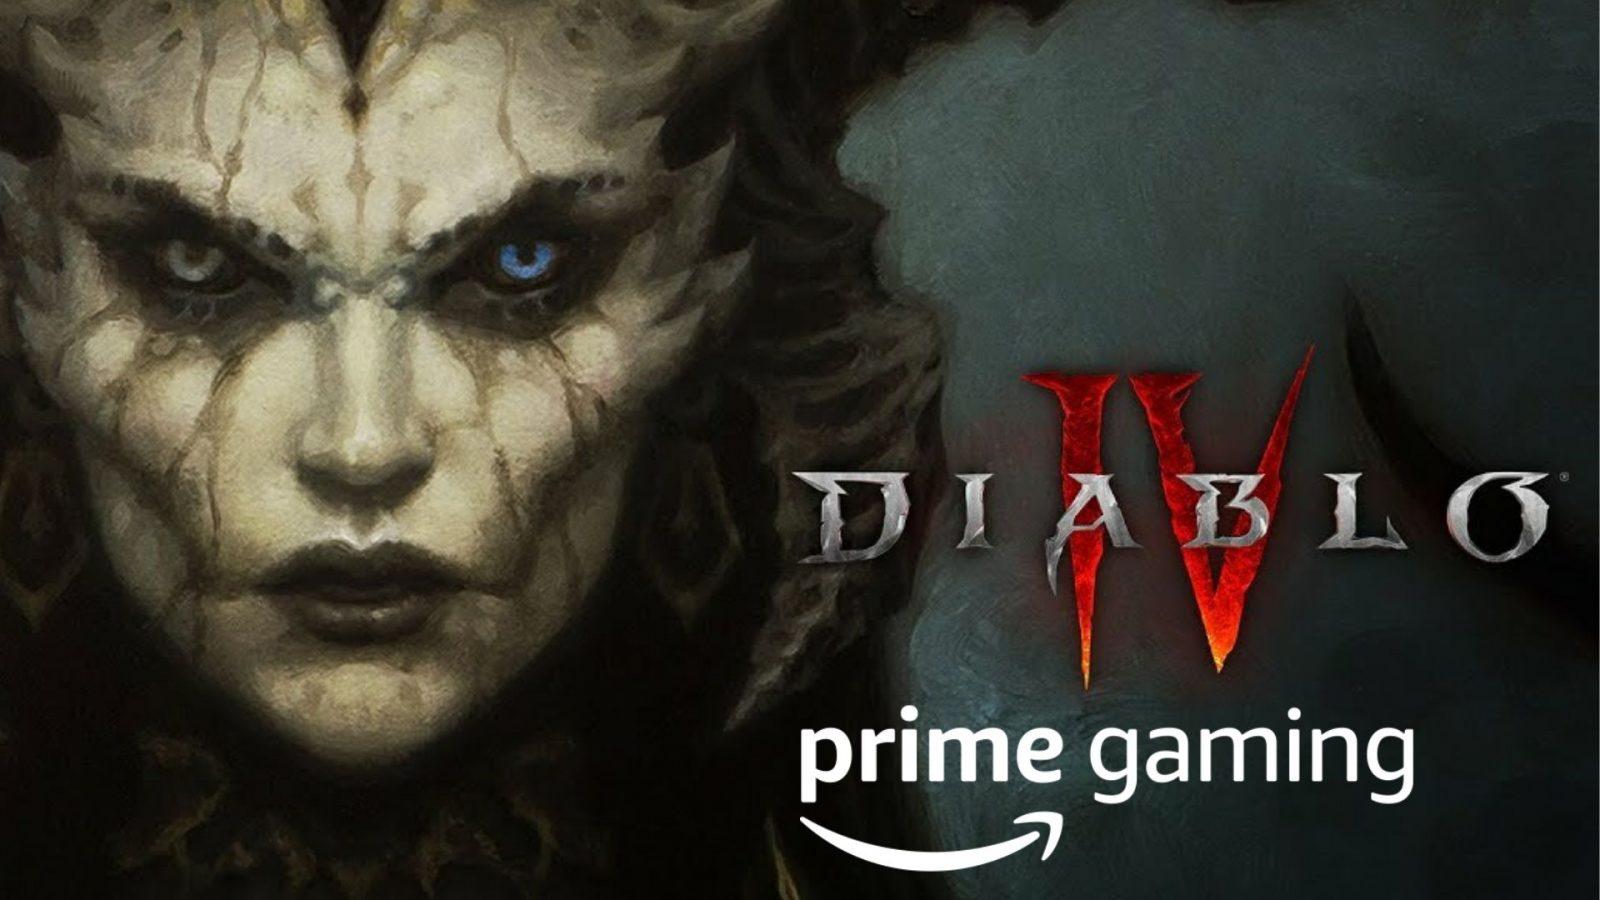 lilith with prime gaming logo in diablo 4